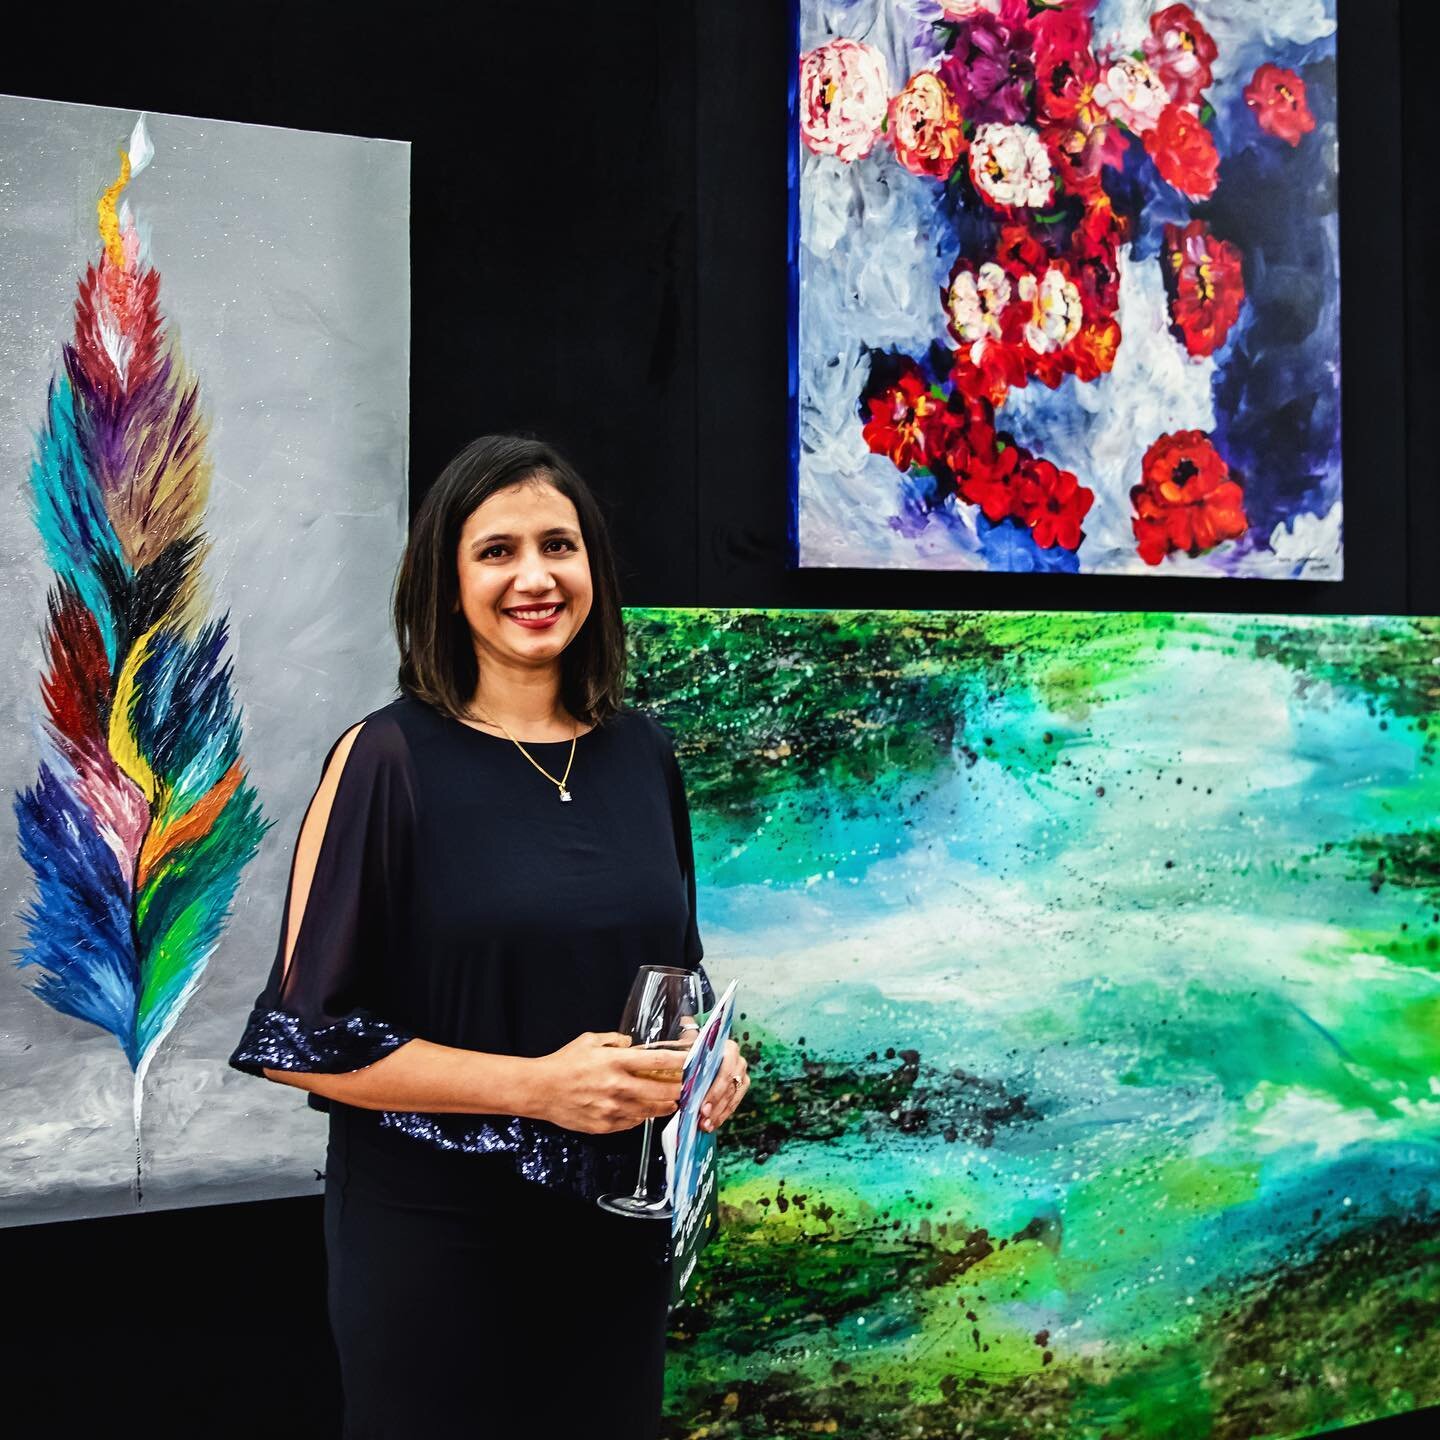 Dr. Divya Chirumamilla, MD
 pictured with her beautiful
artwork at our 2019 gala. ⚡️
The Physicians we work
with have the unique ability
to connect to their patients
through art. 🎨
Through medicine, art,
creativity and community,
we impact physician